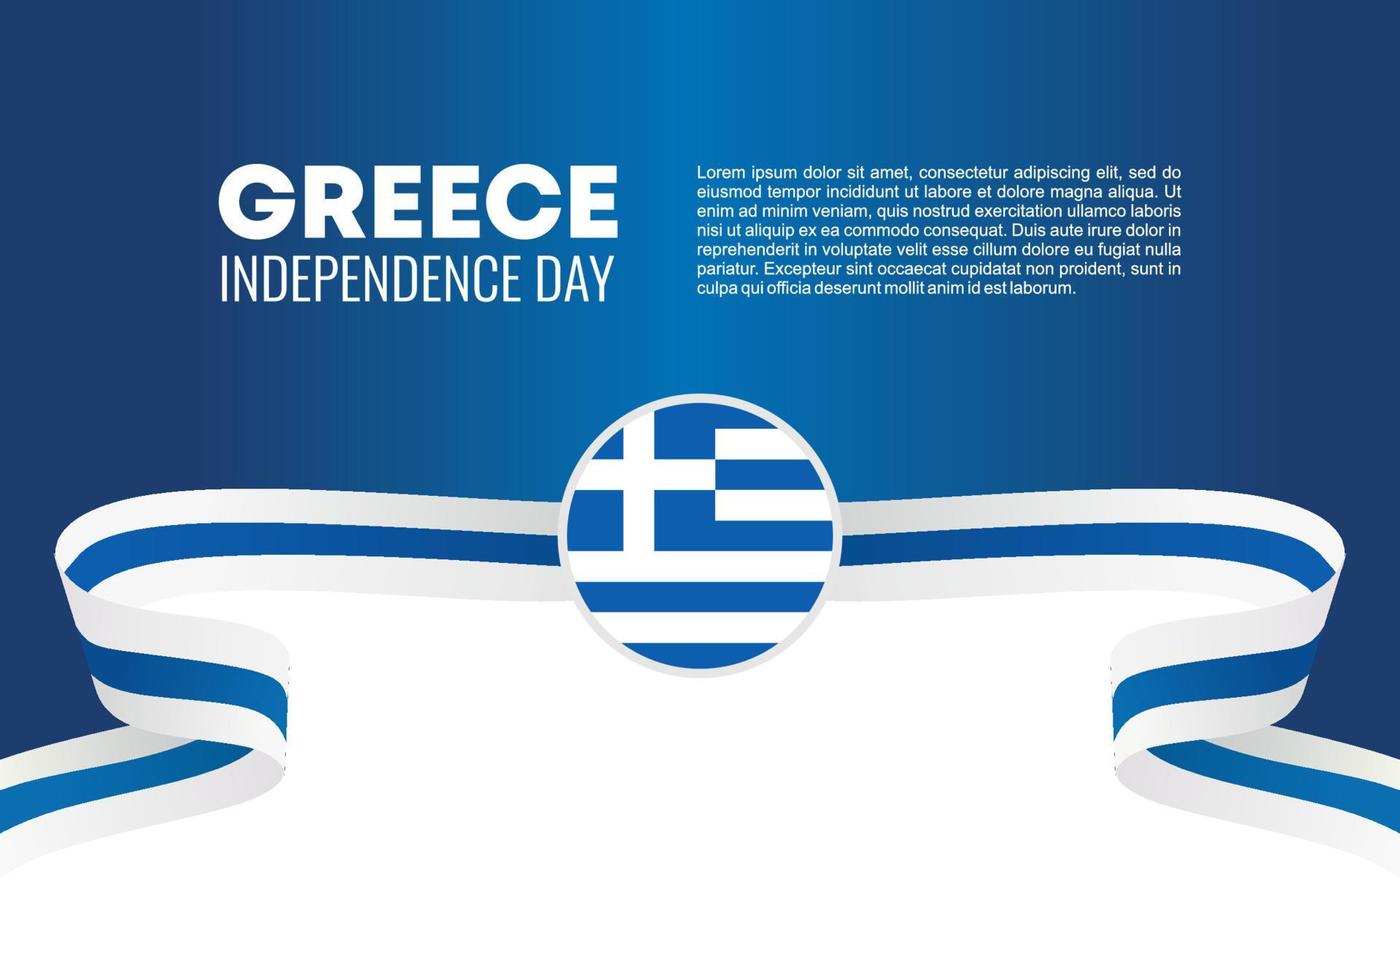 Greece independence day background national celebration on March 25. vector